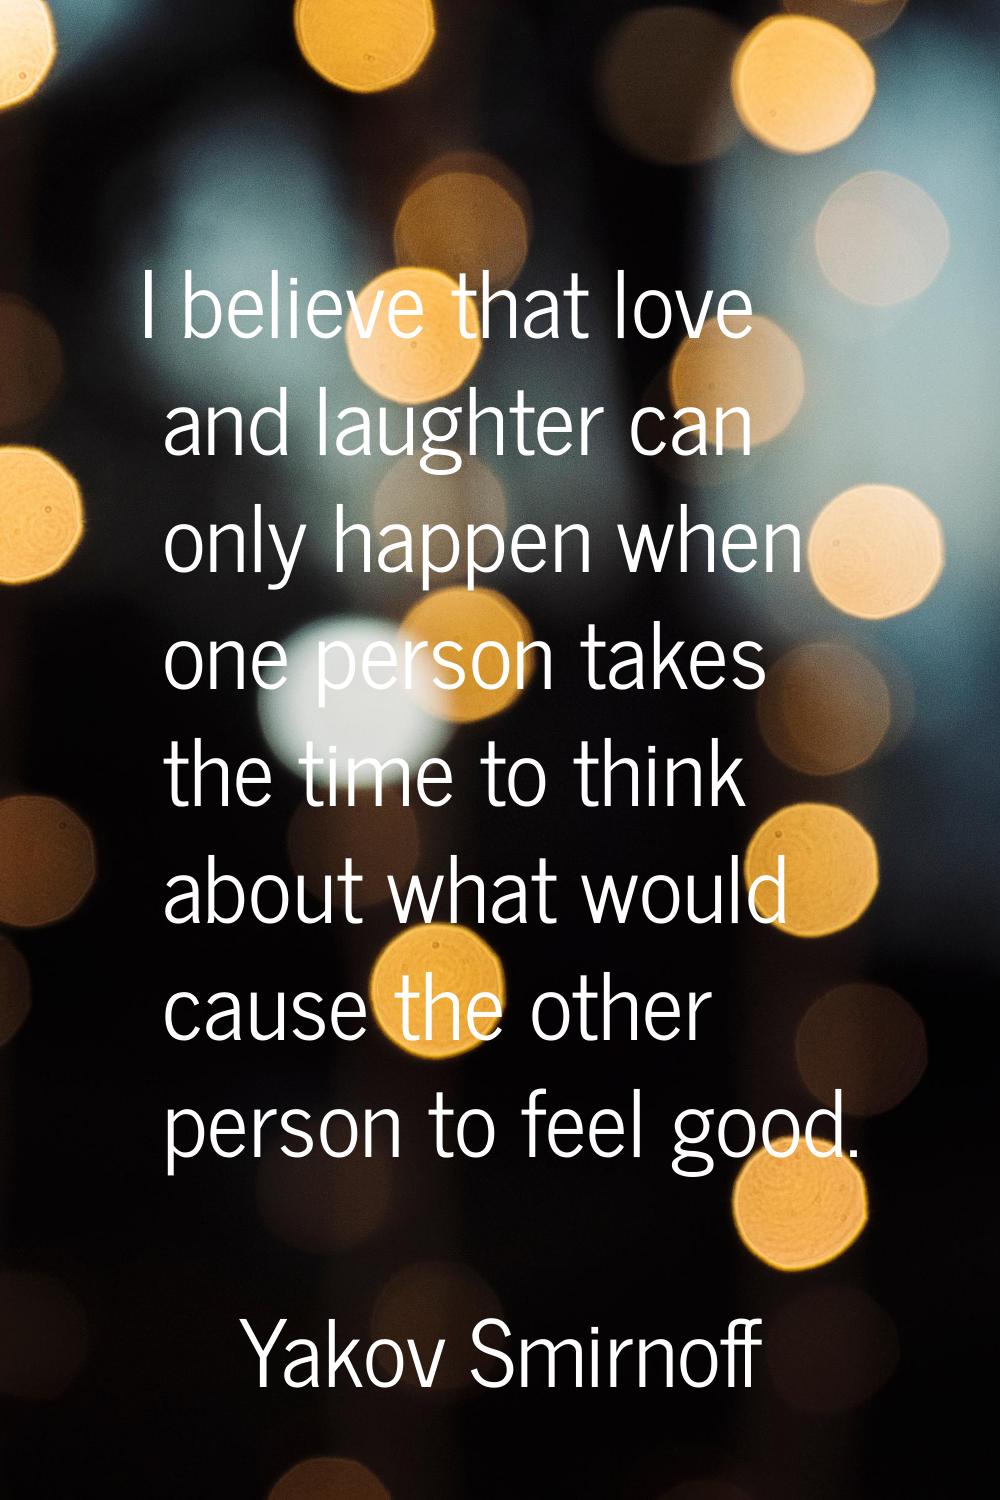 I believe that love and laughter can only happen when one person takes the time to think about what